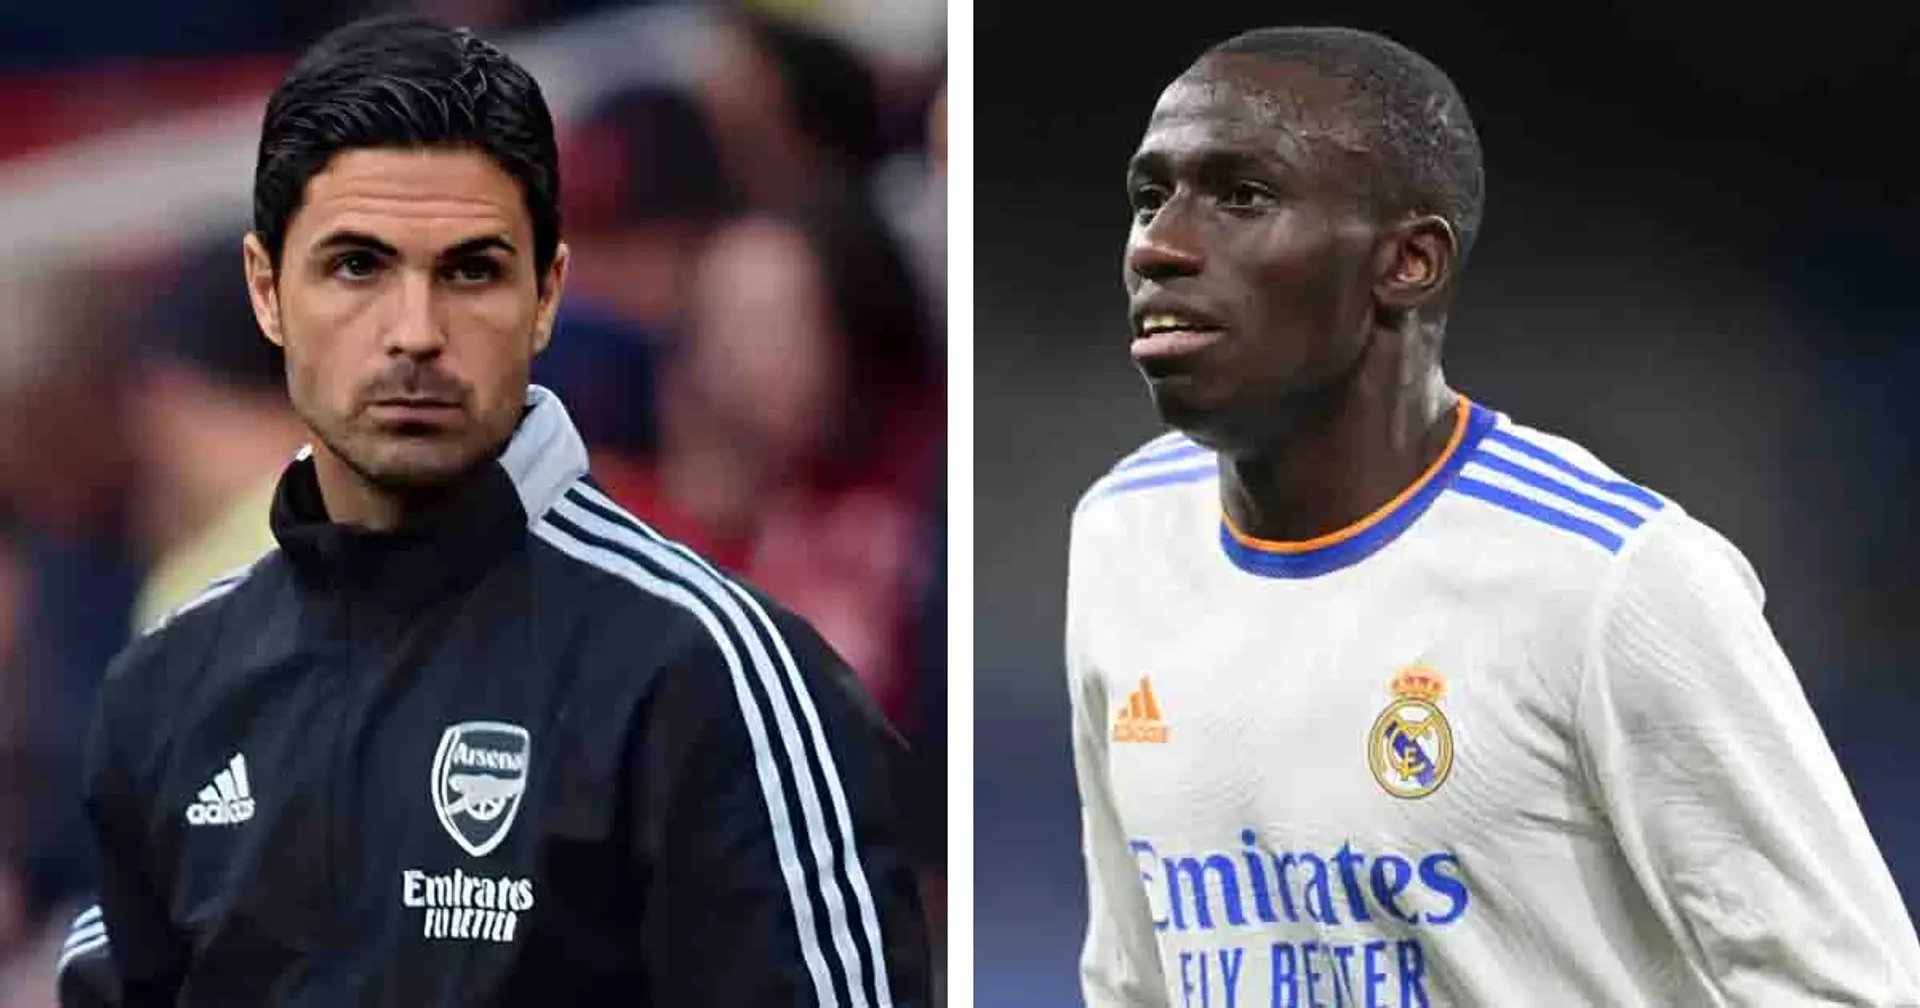 Ferland Mendy attracting Arsenal interest & 3 more big Real Madrid stories you might've missed